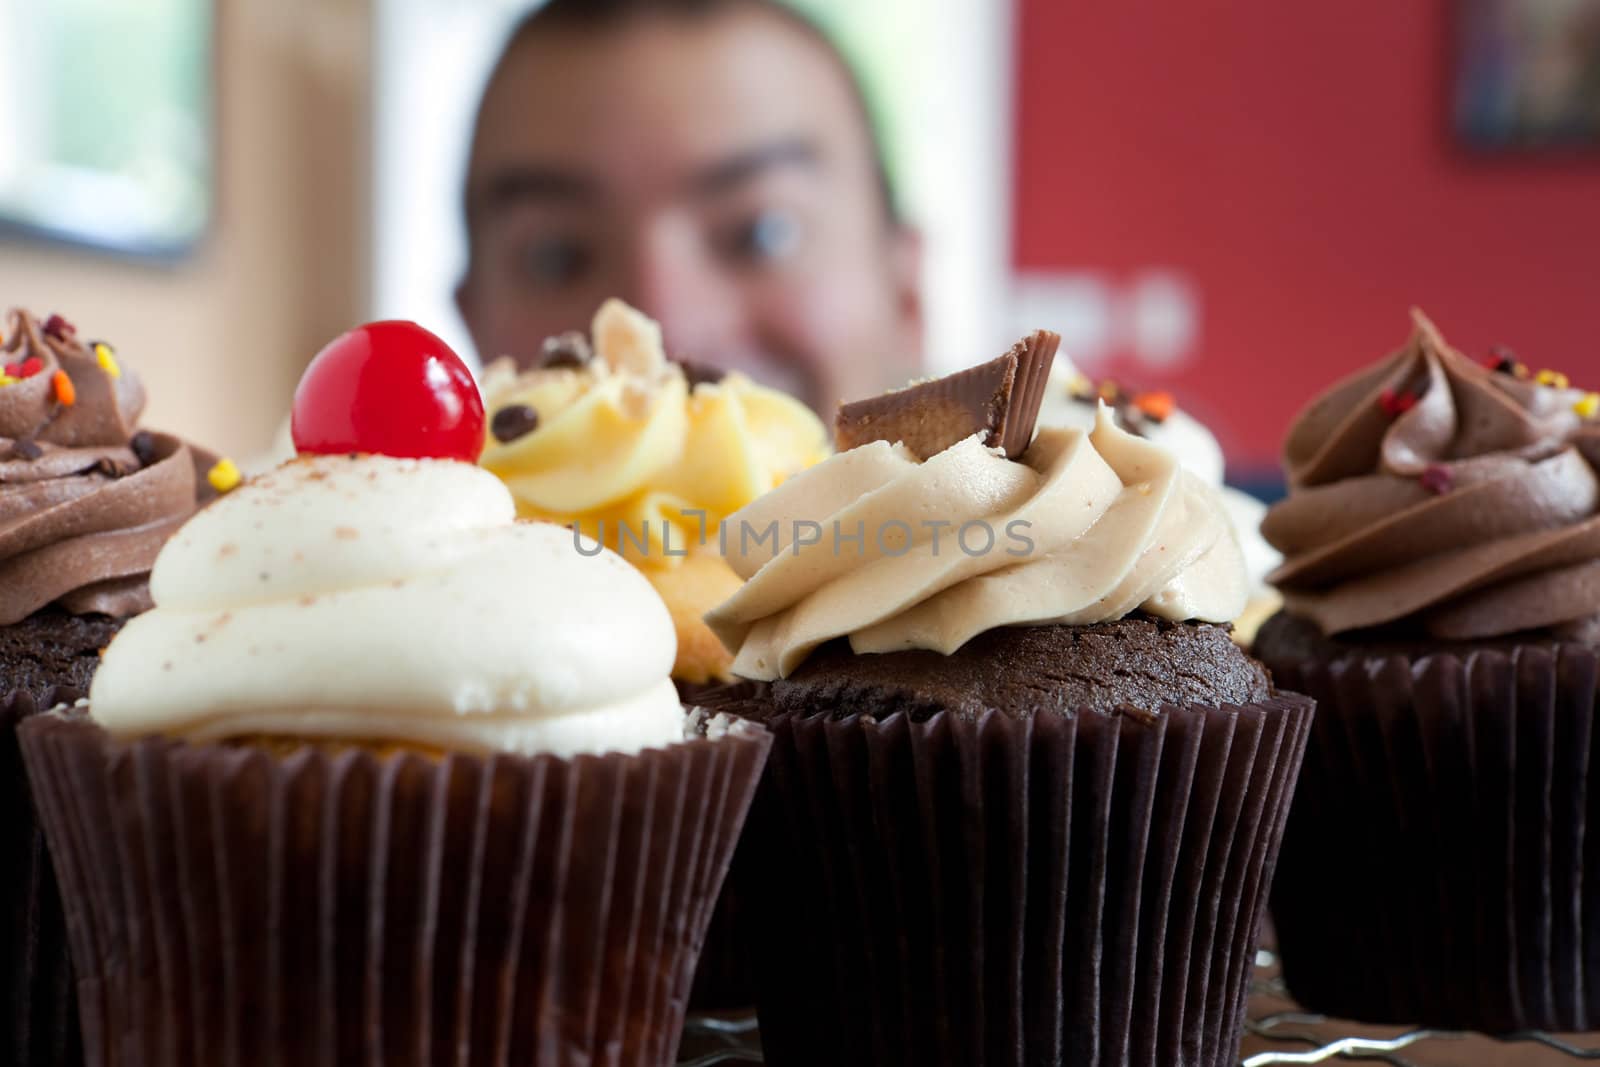 Close up of some decadent gourmet cupcakes frosted with a variety of frosting flavors.  Shallow depth of field with the face of a hungry man lurking in the background.